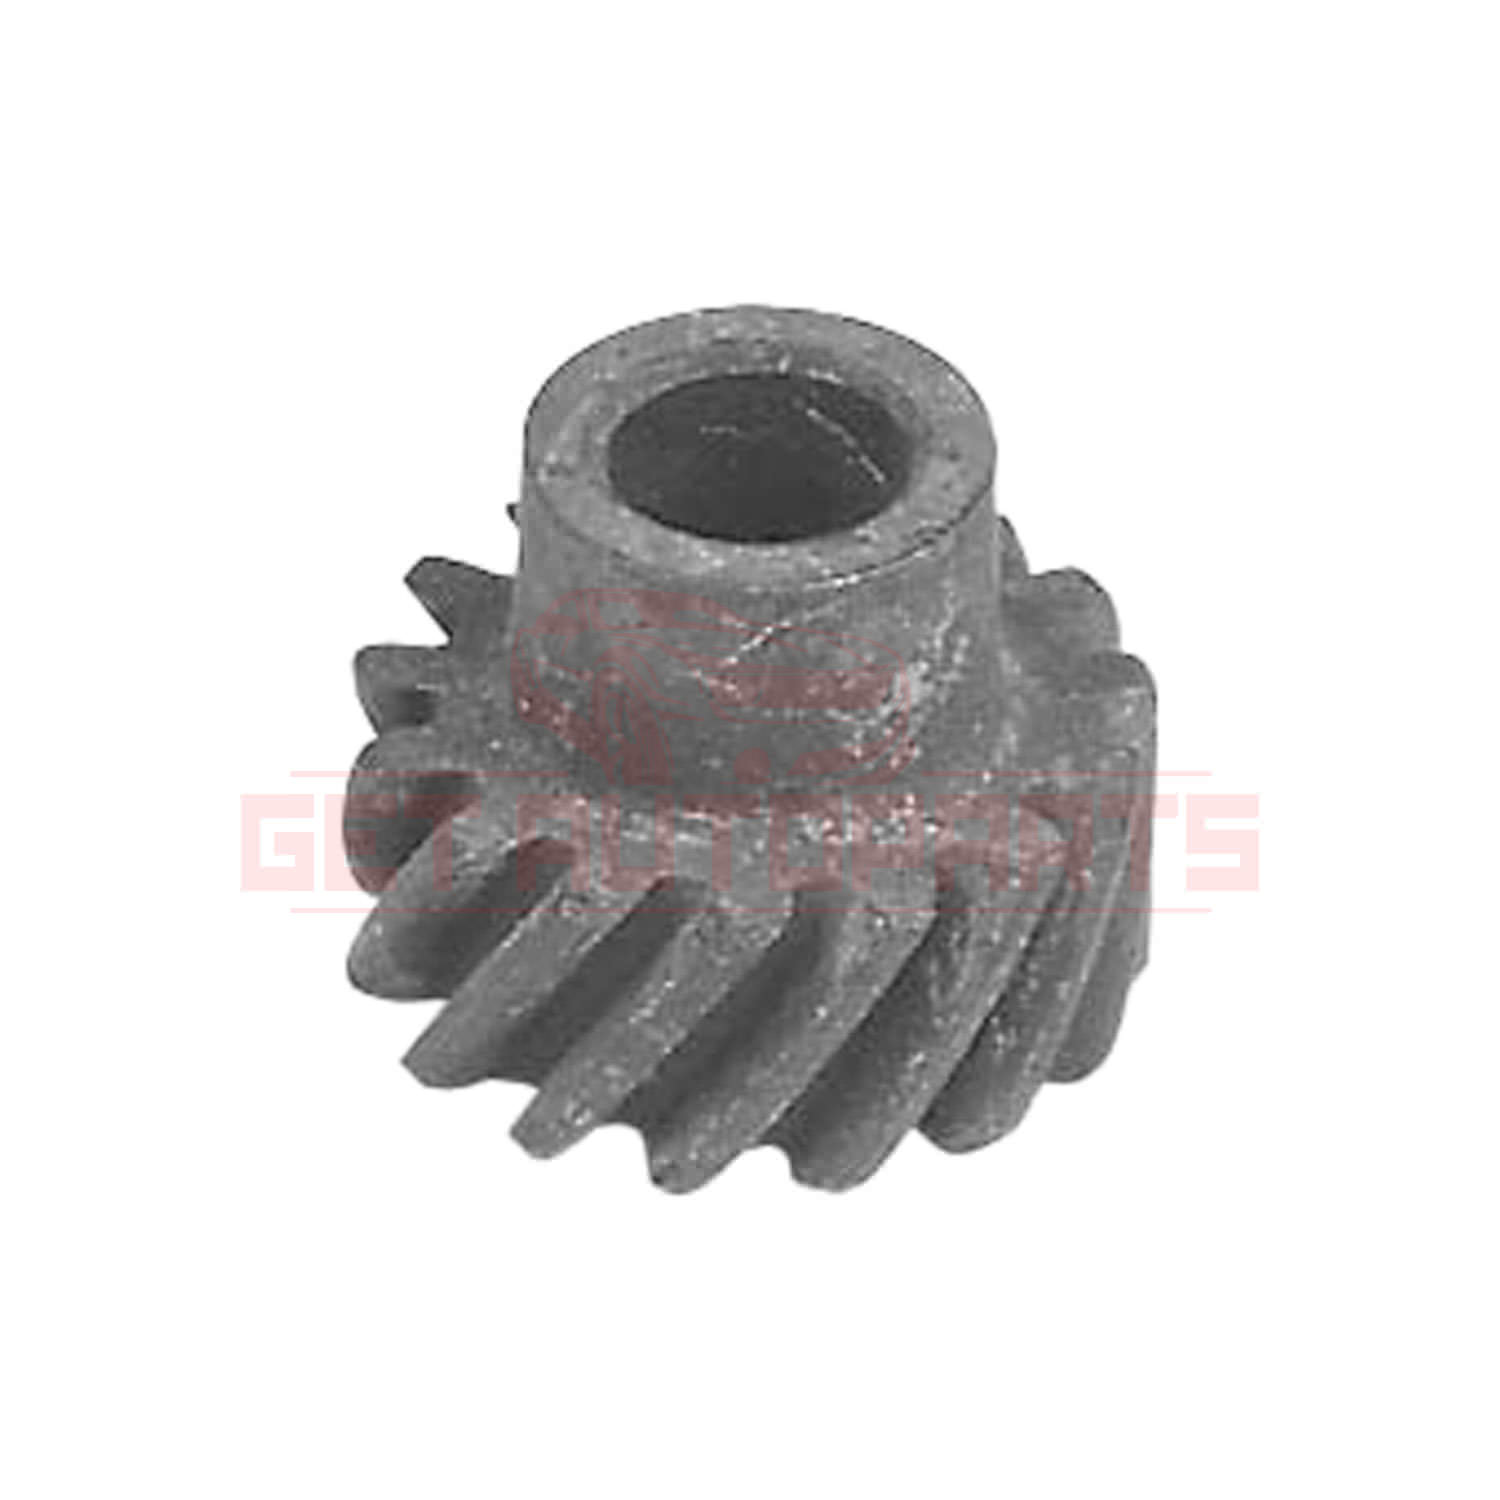 MSD Distributor Drive Gear for Ford Thunderbird 1968-1979